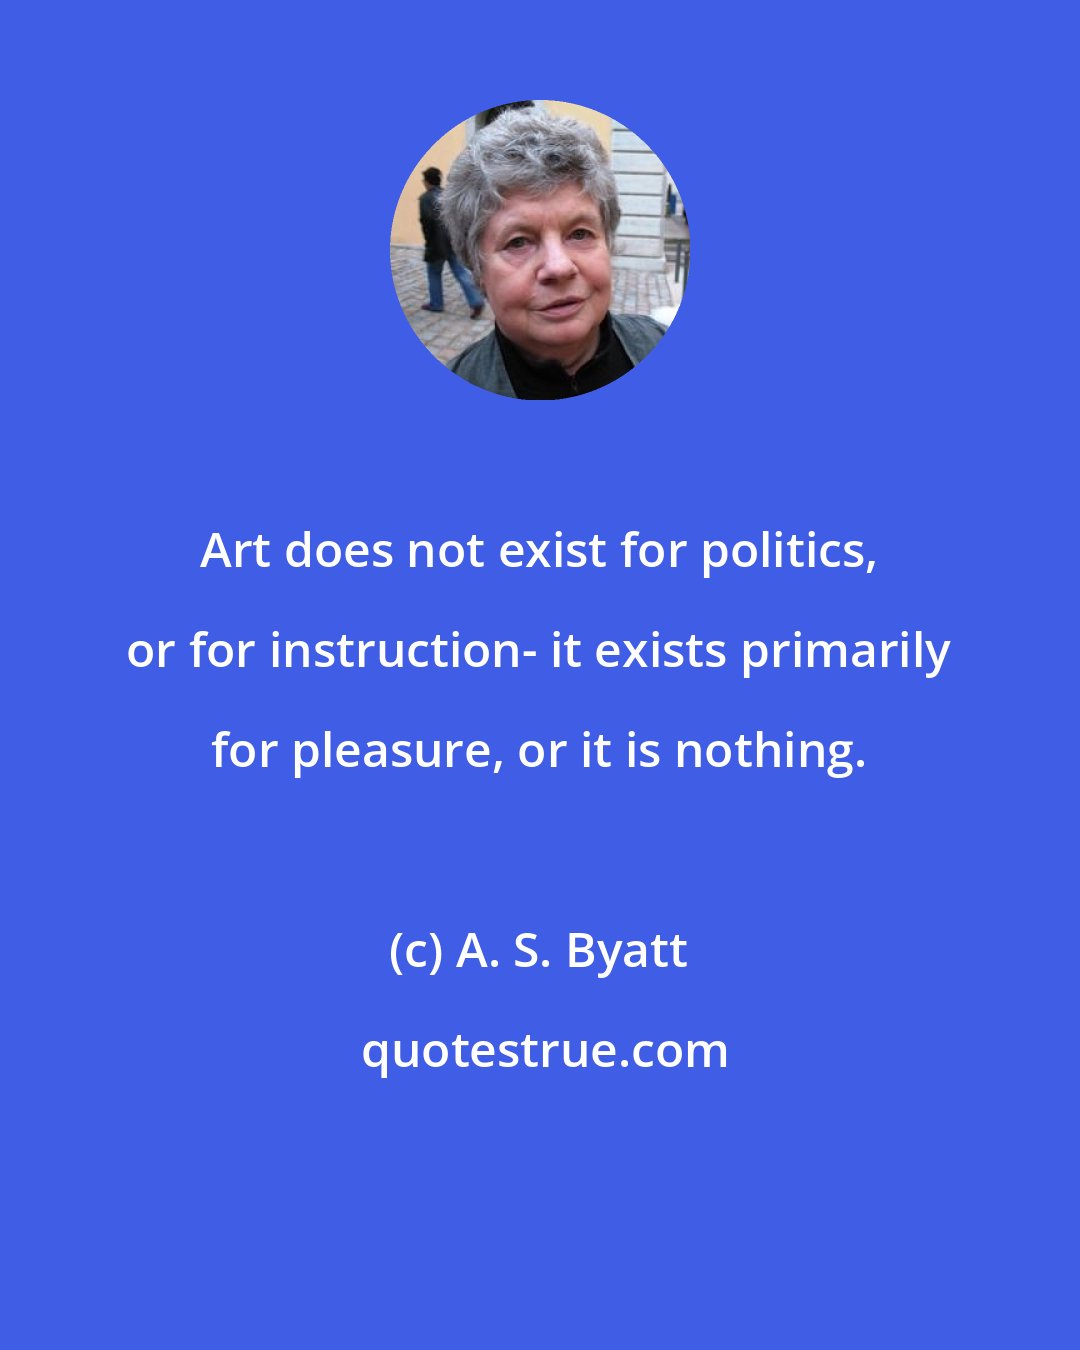 A. S. Byatt: Art does not exist for politics, or for instruction- it exists primarily for pleasure, or it is nothing.